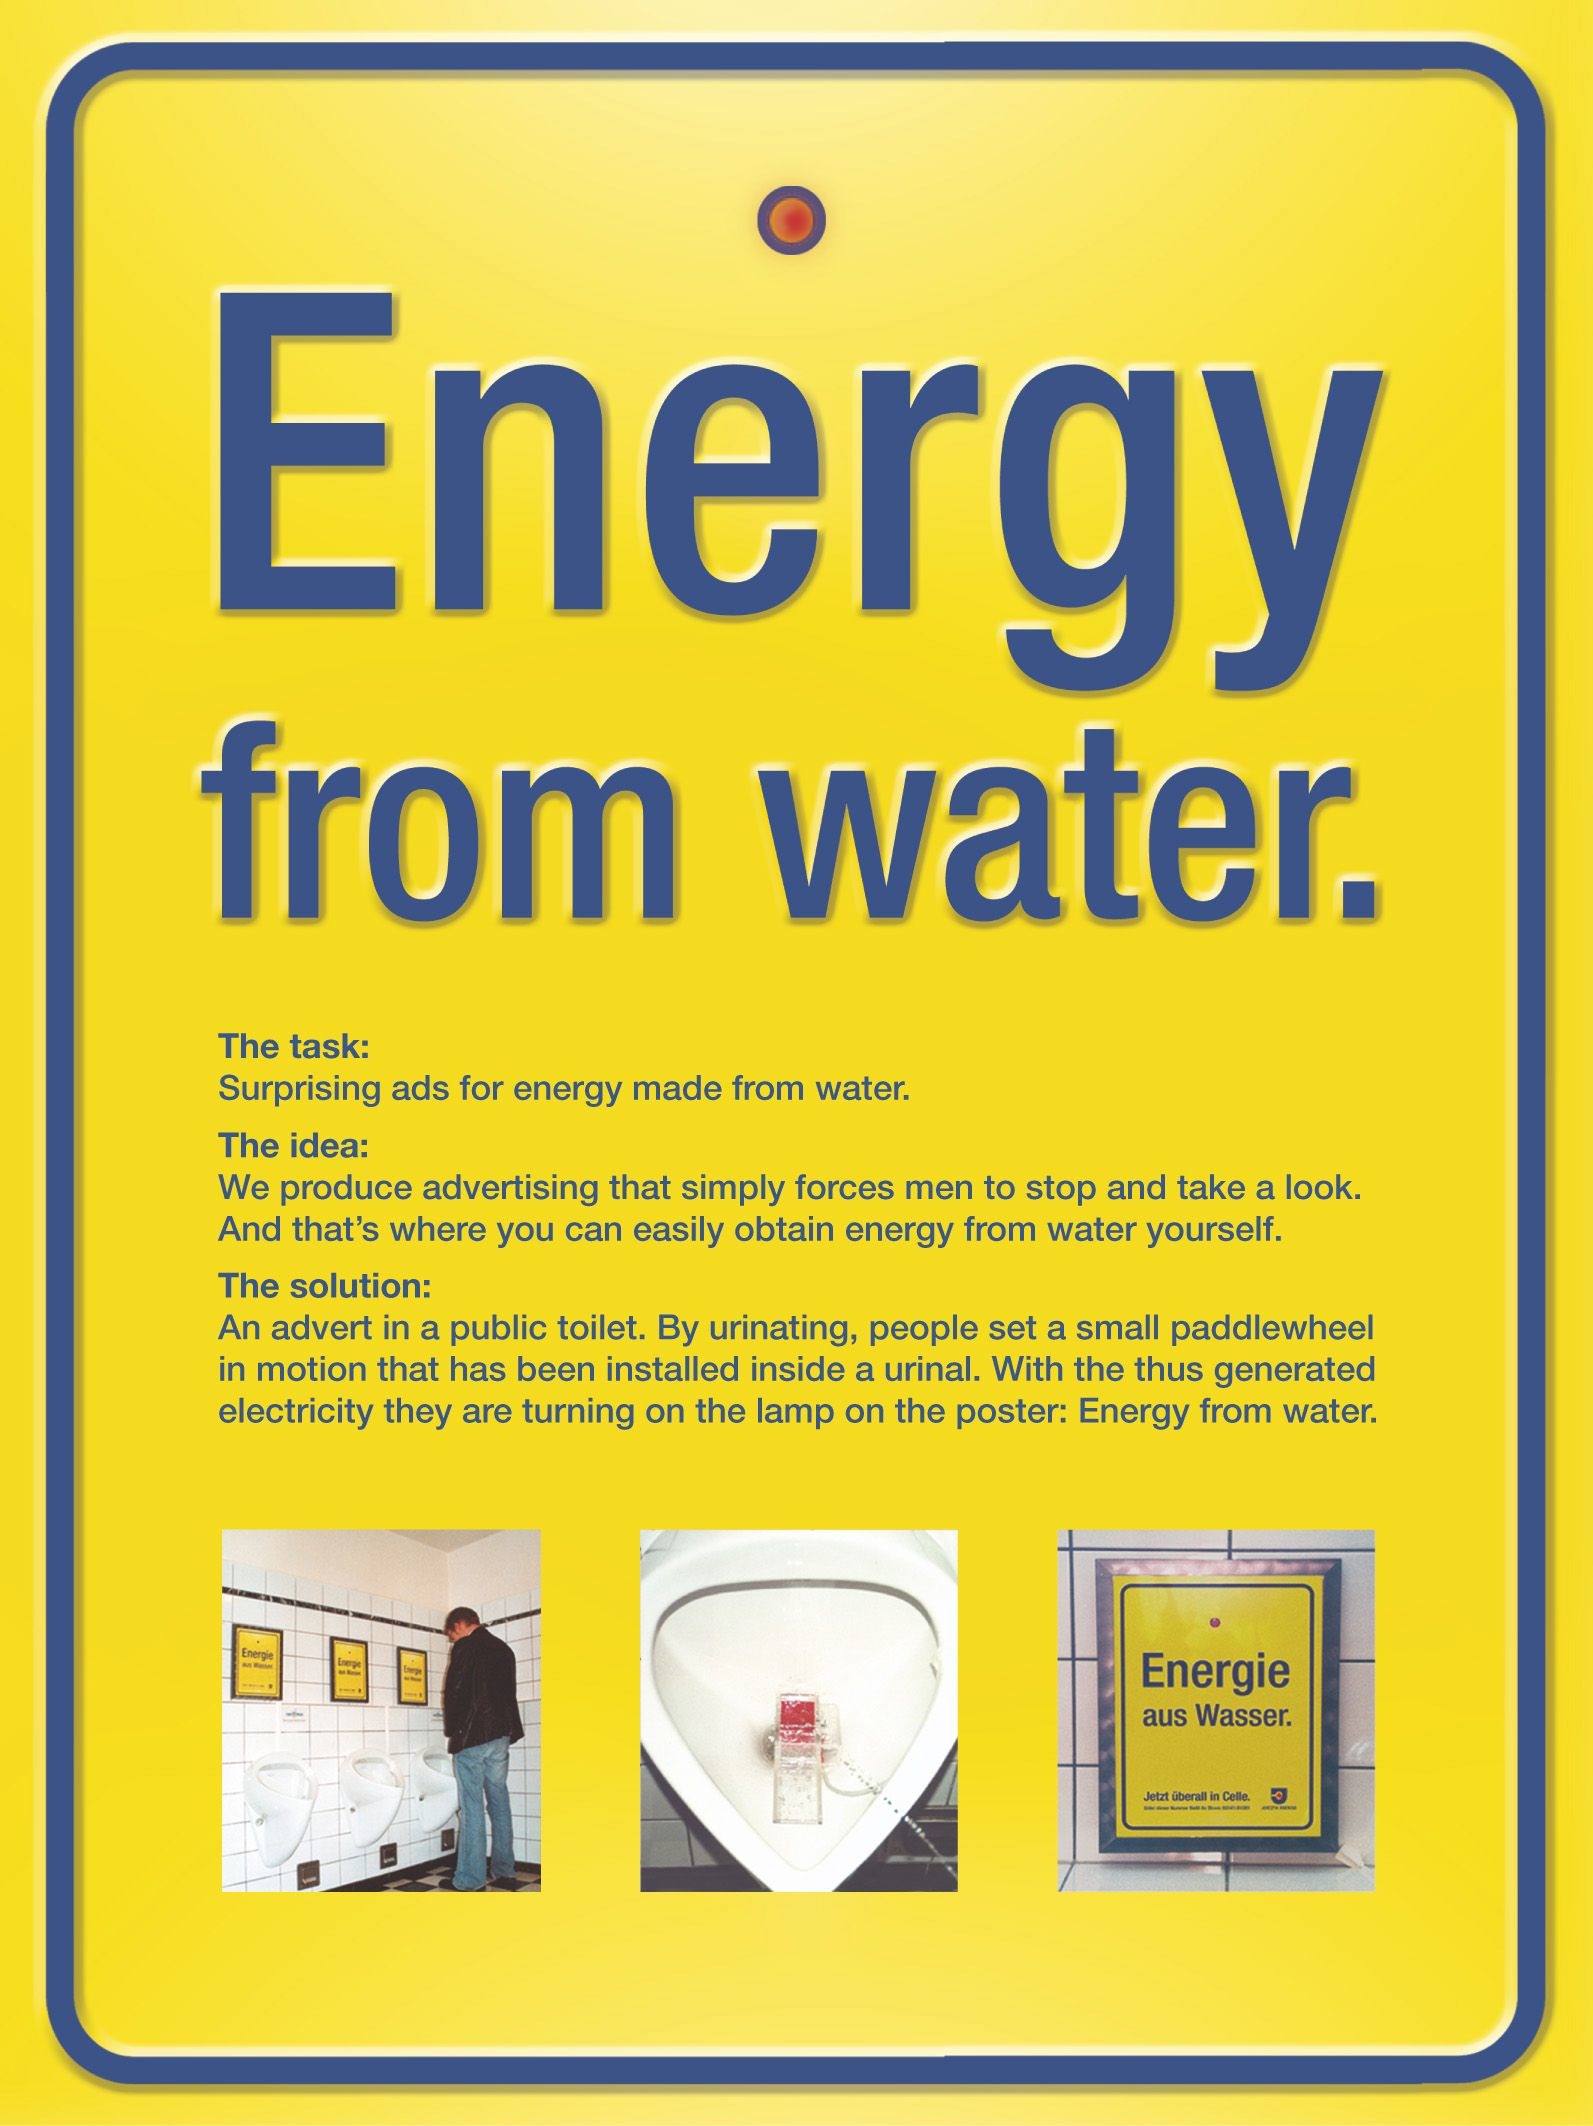 ENERGY FROM WATER